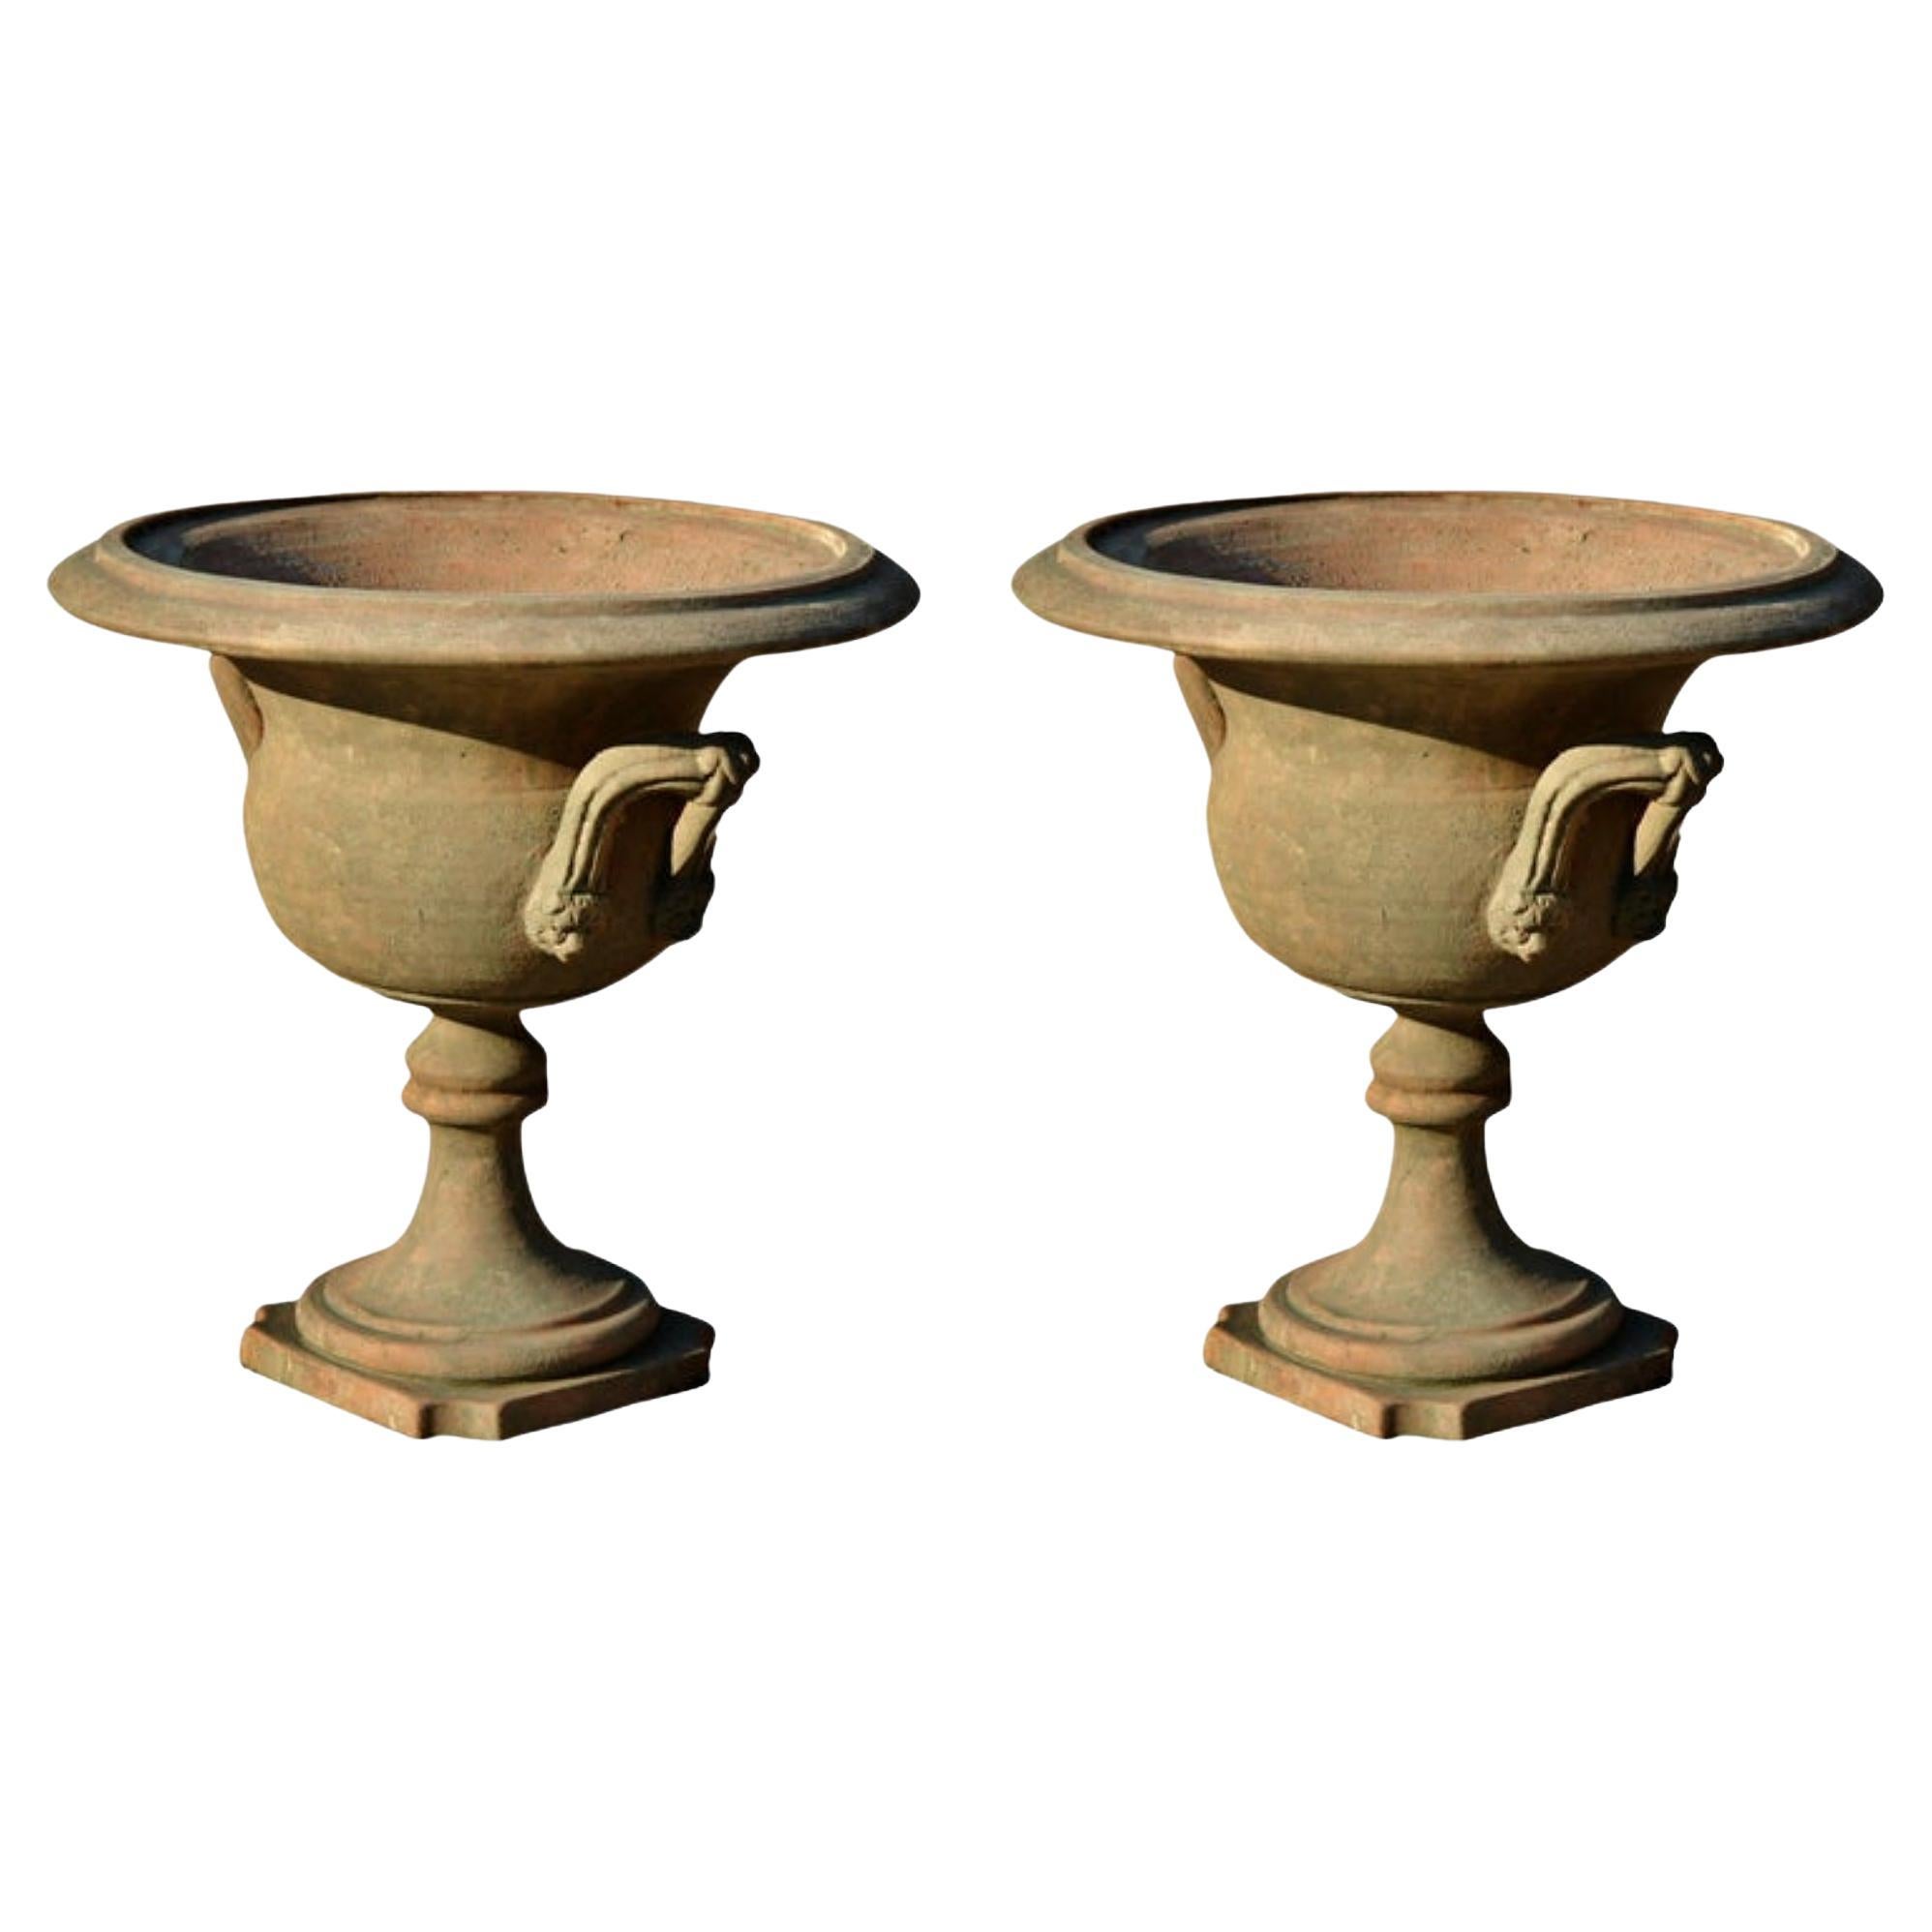 Pair of Ornamental Terracotta Goblet with Loop Handles, Early 20th Century For Sale